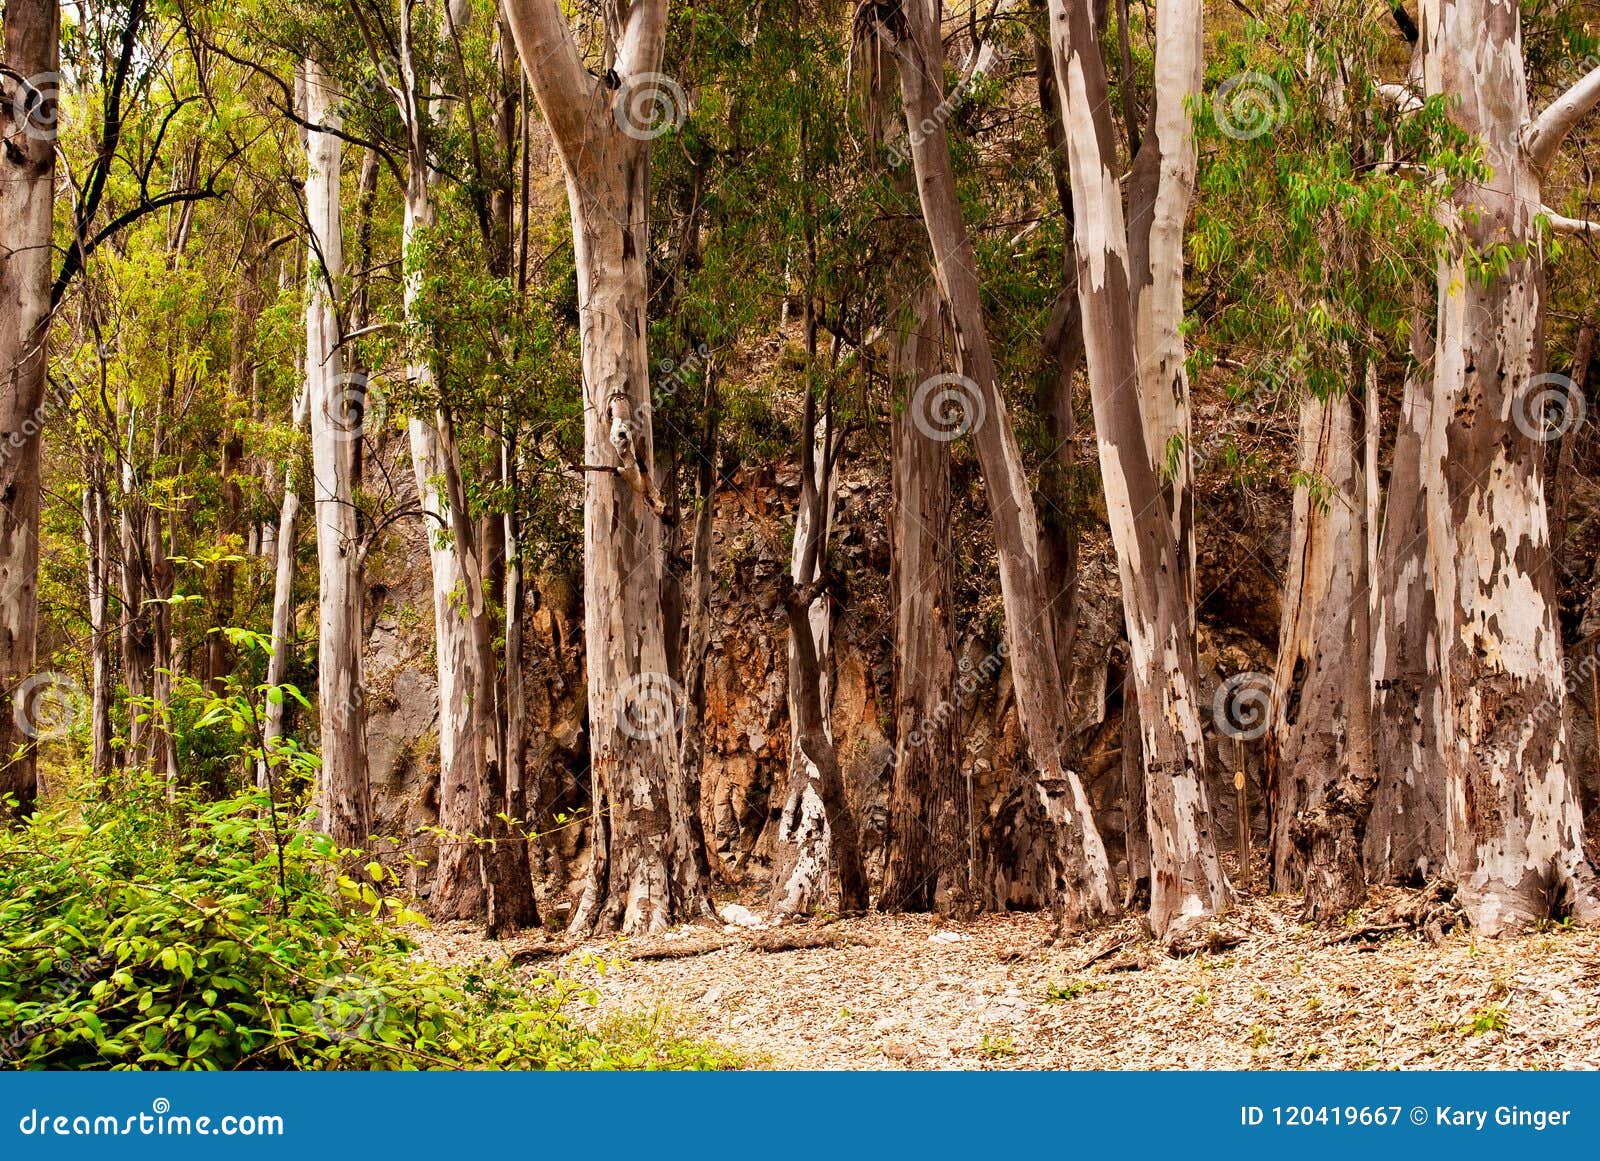 forest in nerja, a large forest along the rio chillar malaga, spain